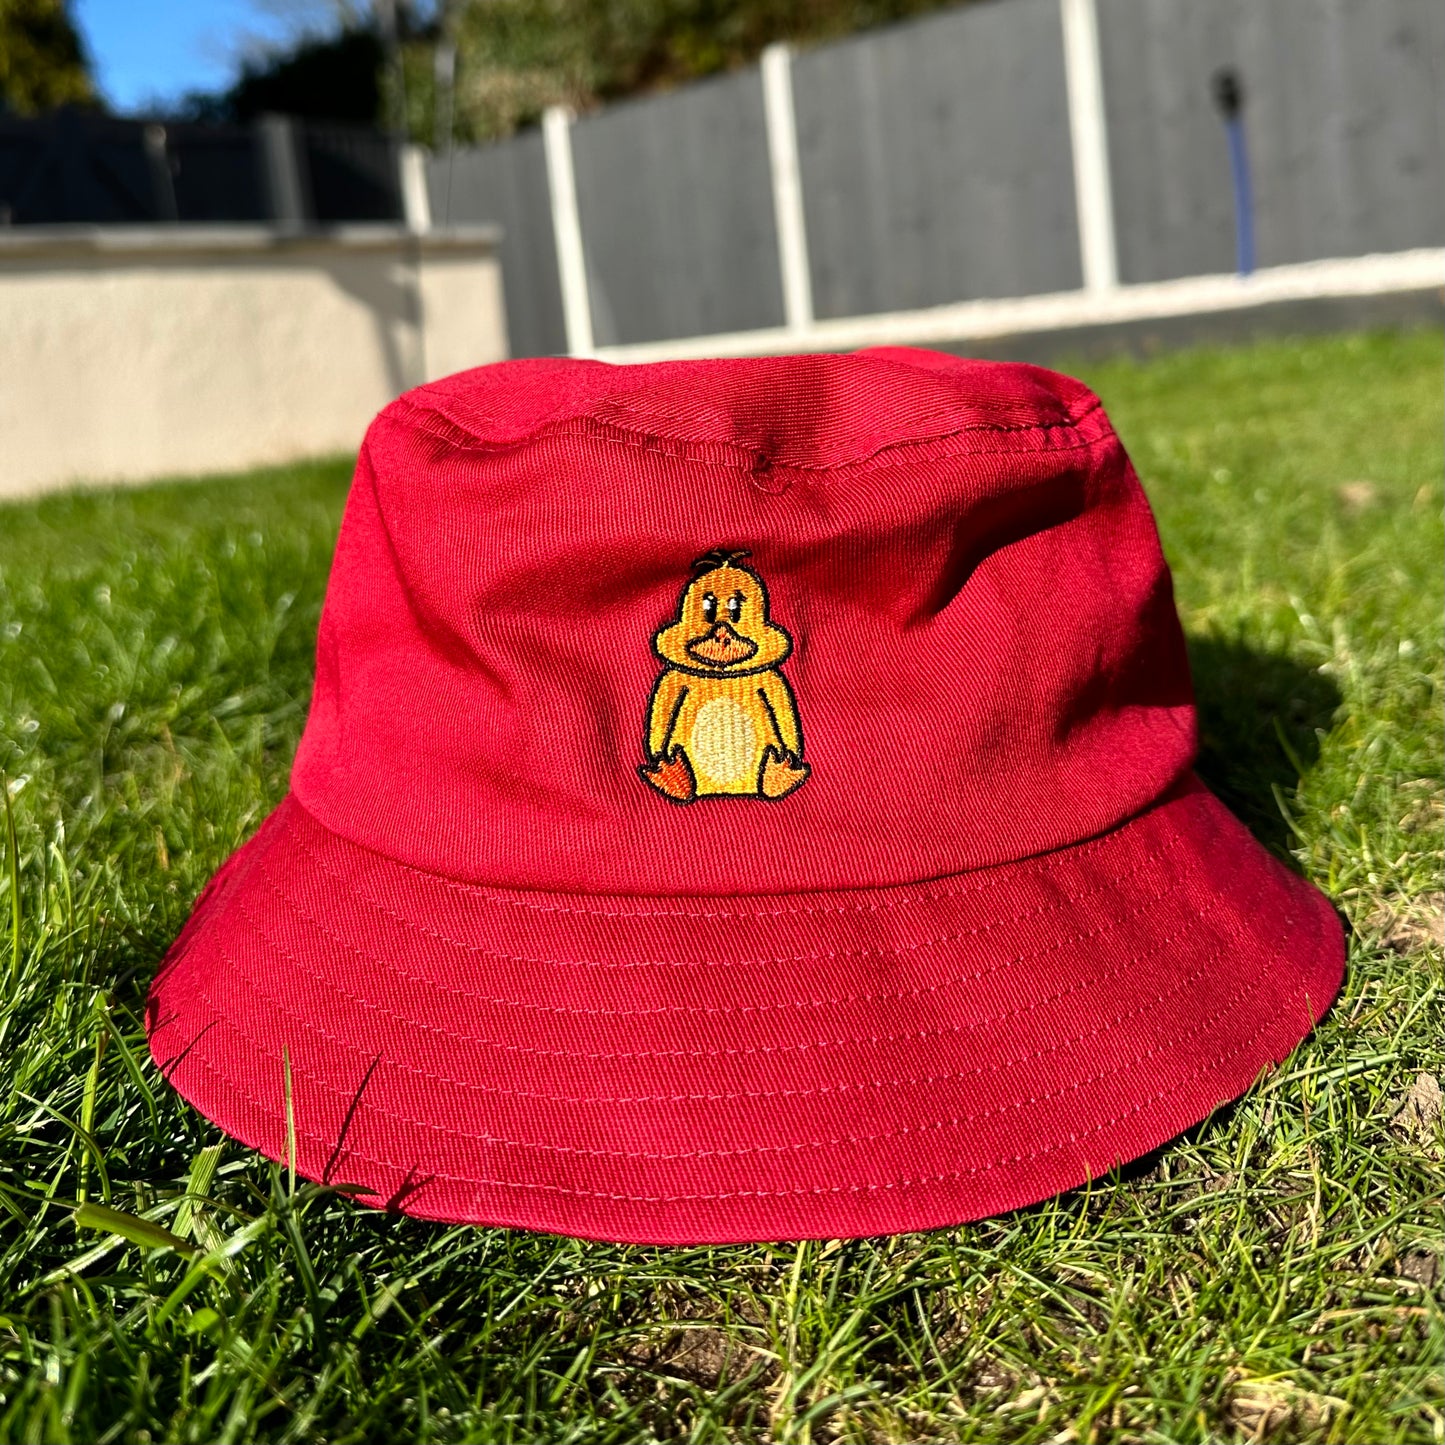 The Official Duckett's Bucket Hat - Red